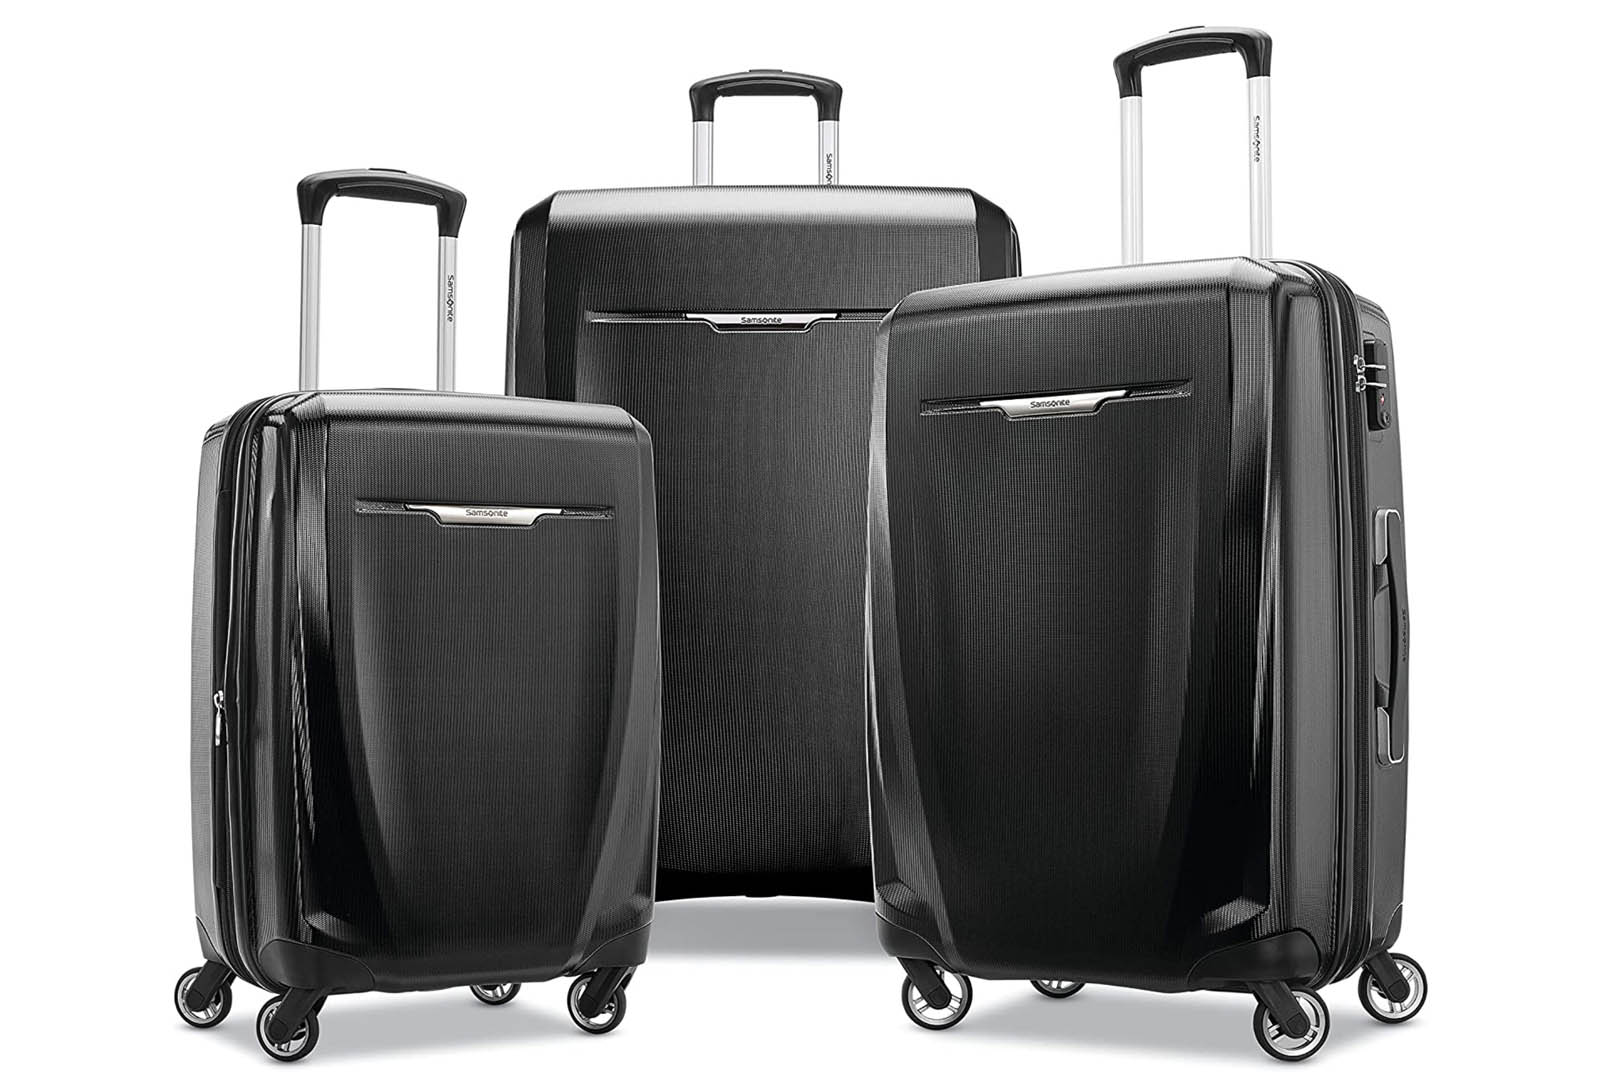 The 15 Best Luxury Luggage Brands